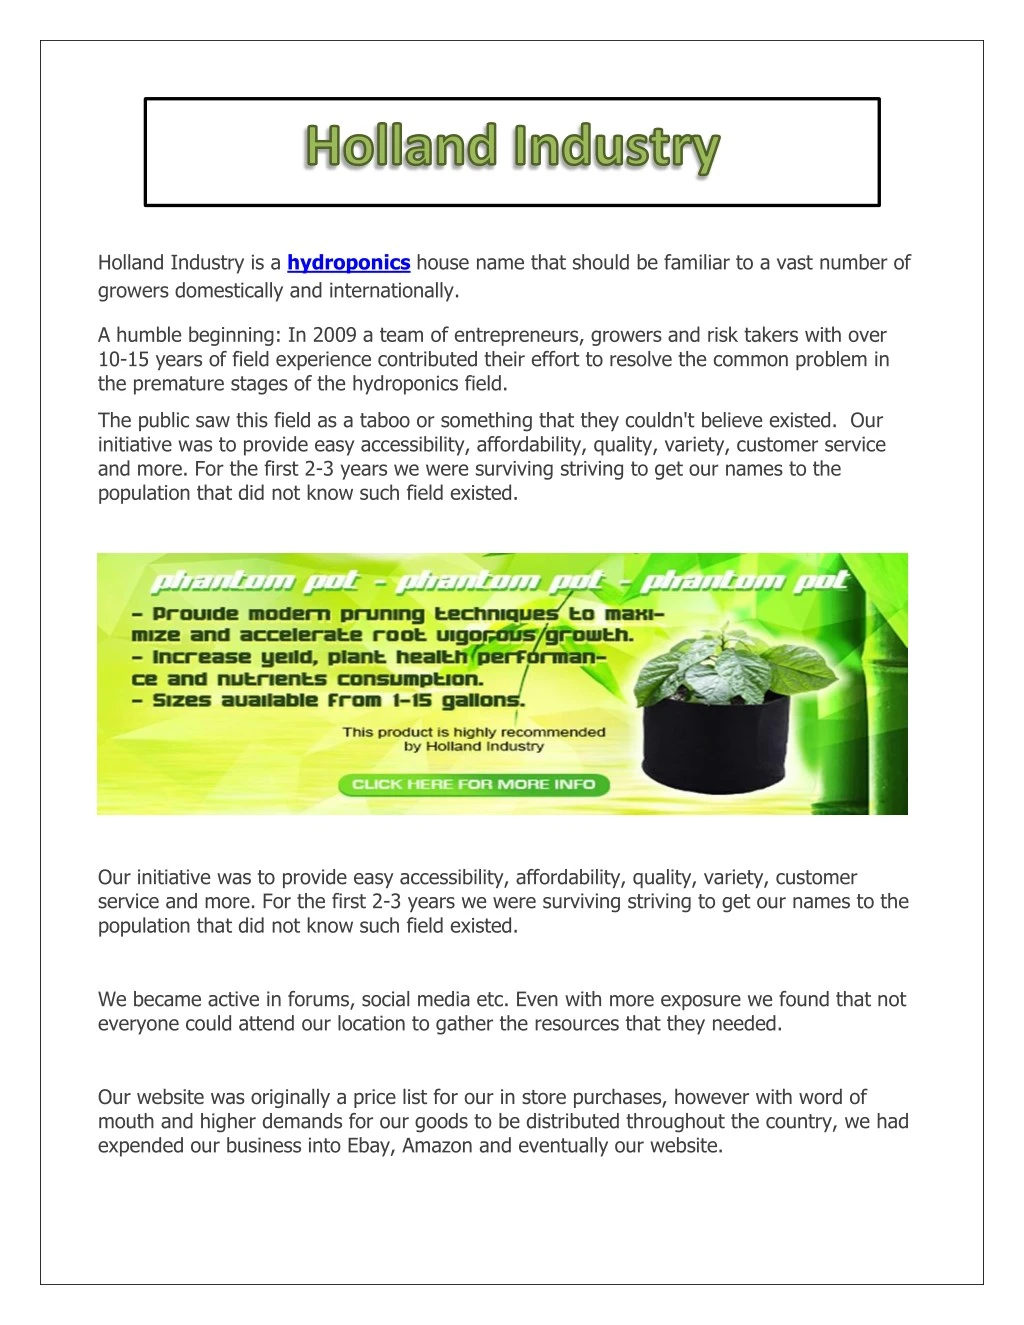 holland industry is a hydroponics house name that